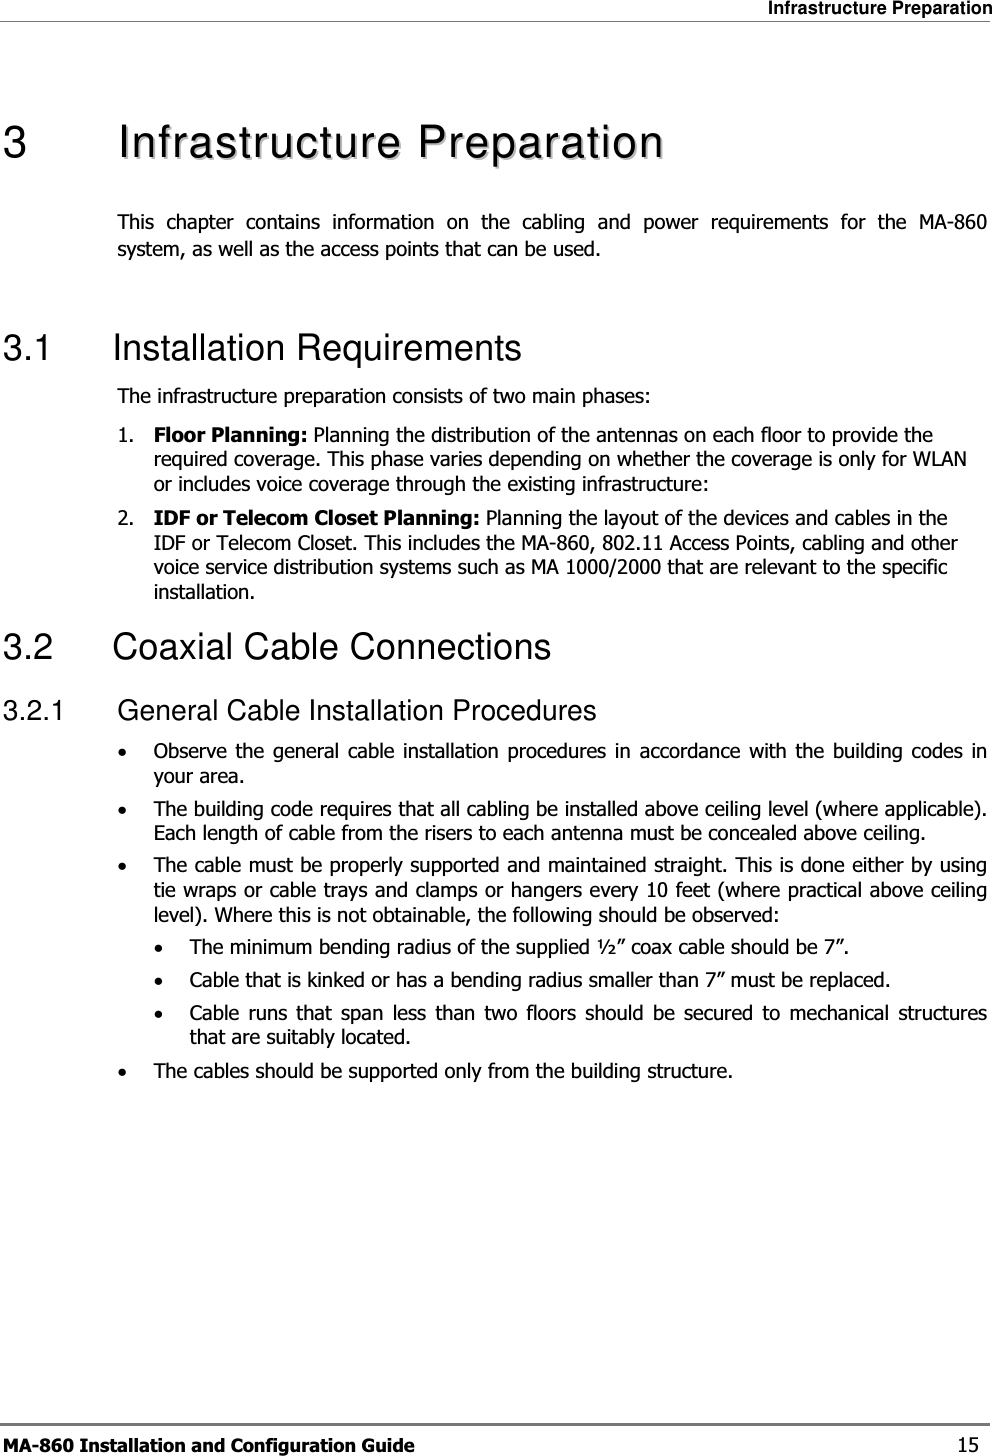 Infrastructure Preparation MA-860 Installation and Configuration Guide    15  3   IInnffrraassttrruuccttuurreePPrreeppaarraattiioonnThis chapter contains information on the cabling and power requirements for the MA-860 system, as well as the access points that can be used.  3.1 Installation Requirements The infrastructure preparation consists of two main phases: 1. Floor Planning: Planning the distribution of the antennas on each floor to provide the required coverage. This phase varies depending on whether the coverage is only for WLAN or includes voice coverage through the existing infrastructure: 2. IDF or Telecom Closet Planning: Planning the layout of the devices and cables in the IDF or Telecom Closet. This includes the MA-860, 802.11 Access Points, cabling and other voice service distribution systems such as MA 1000/2000 that are relevant to the specific installation. 3.2 Coaxial Cable Connections 3.2.1  General Cable Installation Procedures •Observe the general cable installation procedures in accordance with the building codes in your area.  •The building code requires that all cabling be installed above ceiling level (where applicable). Each length of cable from the risers to each antenna must be concealed above ceiling.  •The cable must be properly supported and maintained straight. This is done either by using tie wraps or cable trays and clamps or hangers every 10 feet (where practical above ceiling level). Where this is not obtainable, the following should be observed: •The minimum bending radius of the supplied ½” coax cable should be 7”. •Cable that is kinked or has a bending radius smaller than 7” must be replaced. •Cable runs that span less than two floors should be secured to mechanical structures that are suitably located. •The cables should be supported only from the building structure. 